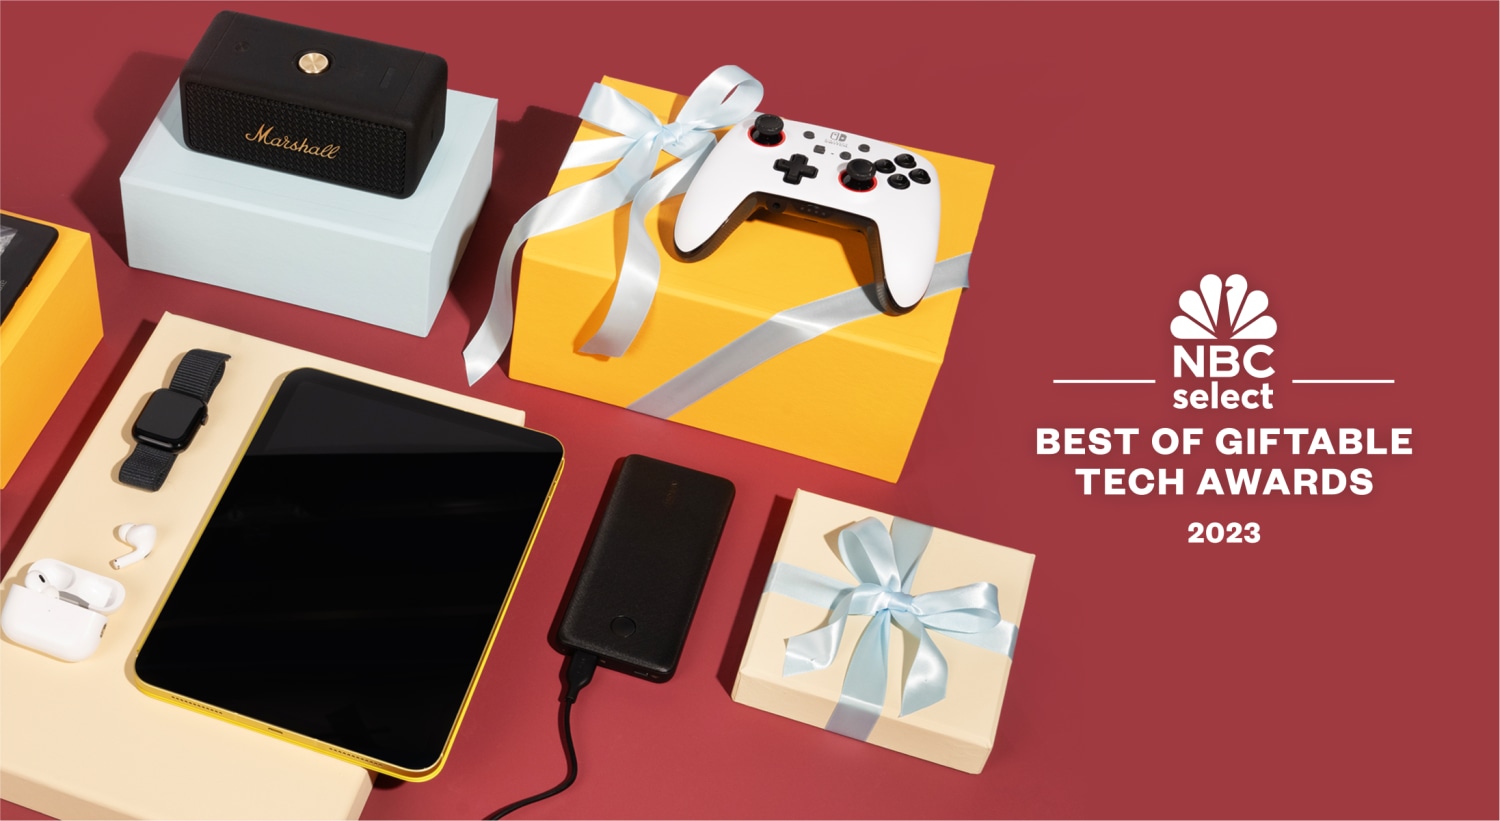 My 30 Favorite Tech Gadgets You Can Buy (Ultimate Gift Guide) - YouTube